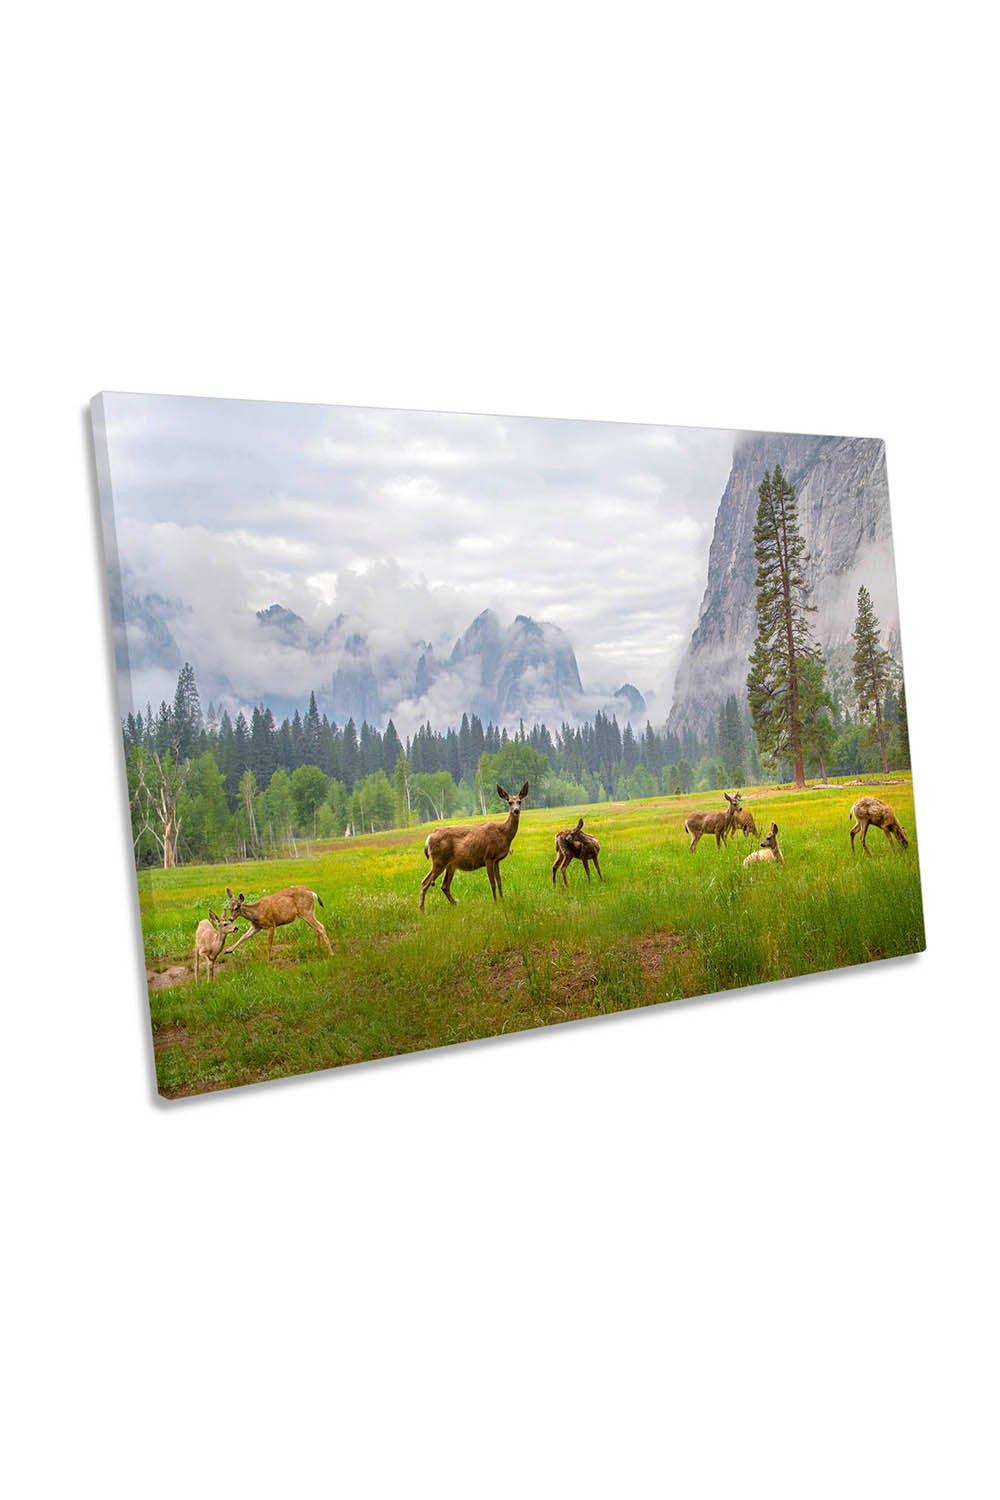 A Feeling of Ancient Time Deer Wildlife Canvas Wall Art Picture Print